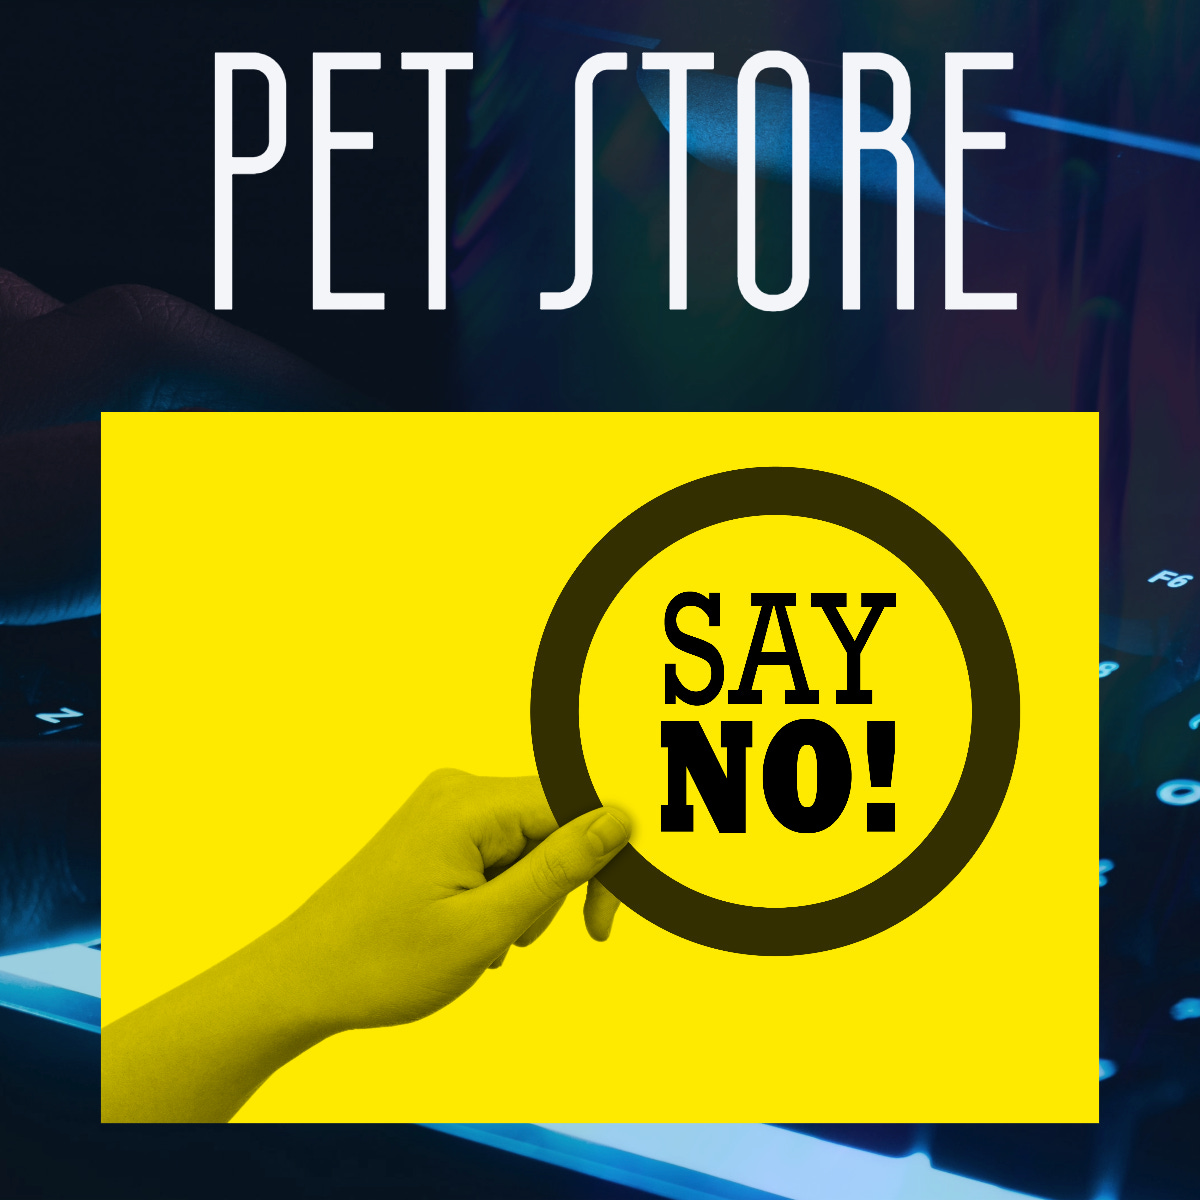 Mem with title "Pet Store" and  a yellow card with a hand holding a round sign that reads "SAY NO!"